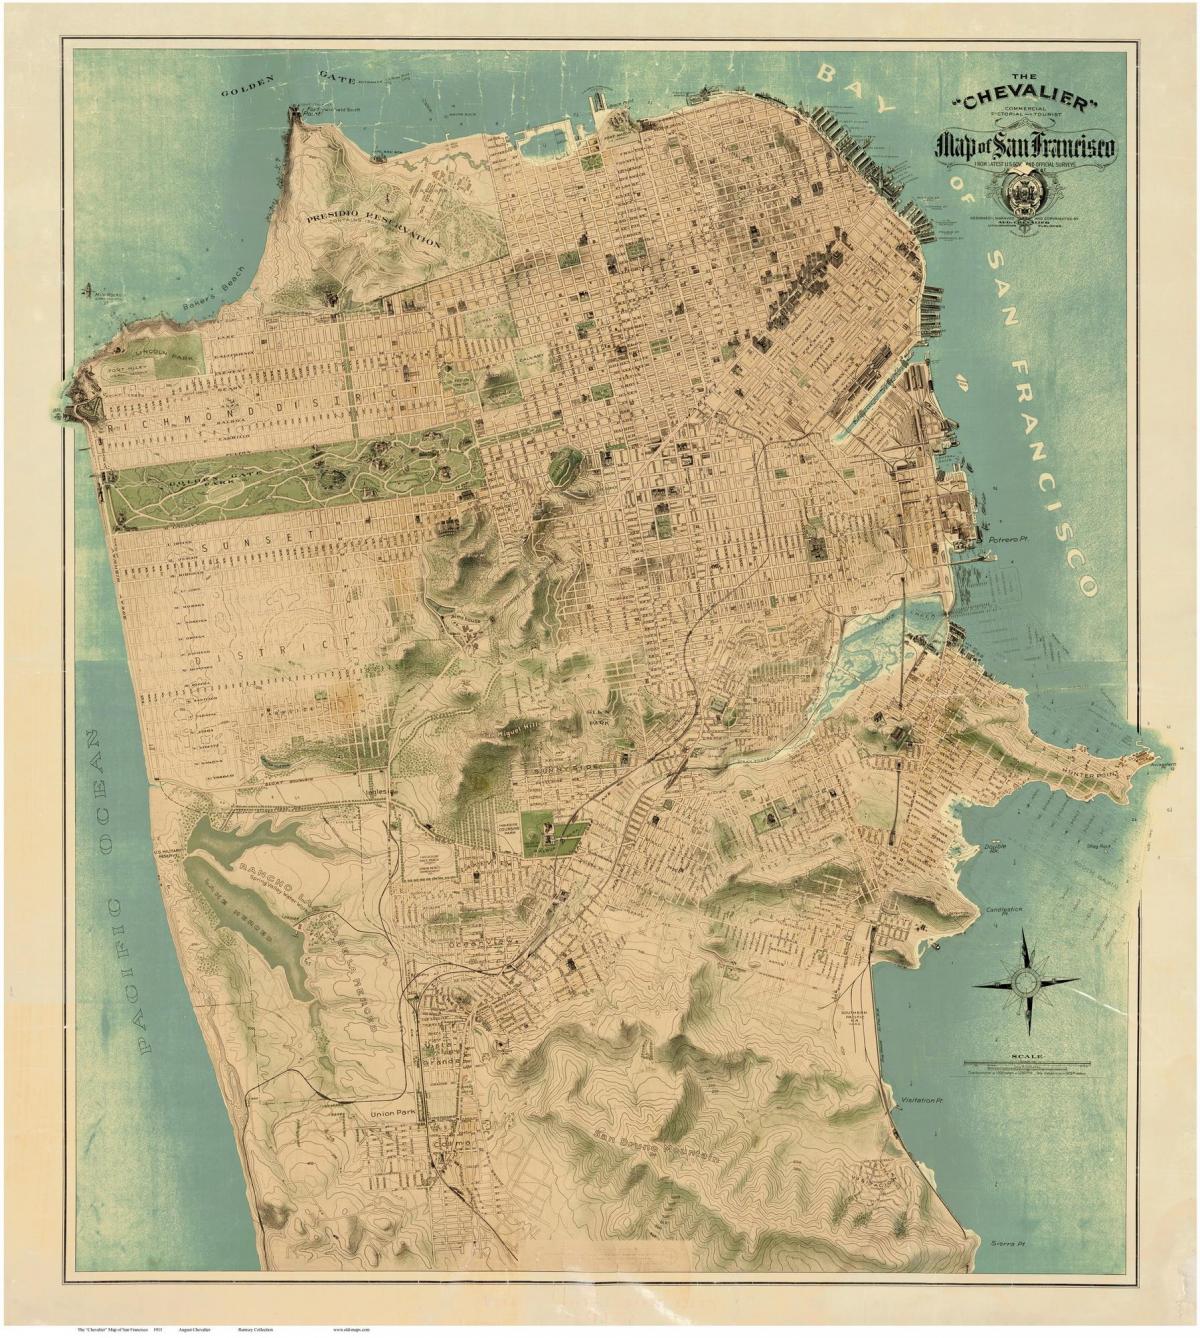 Map of old San Francisco 